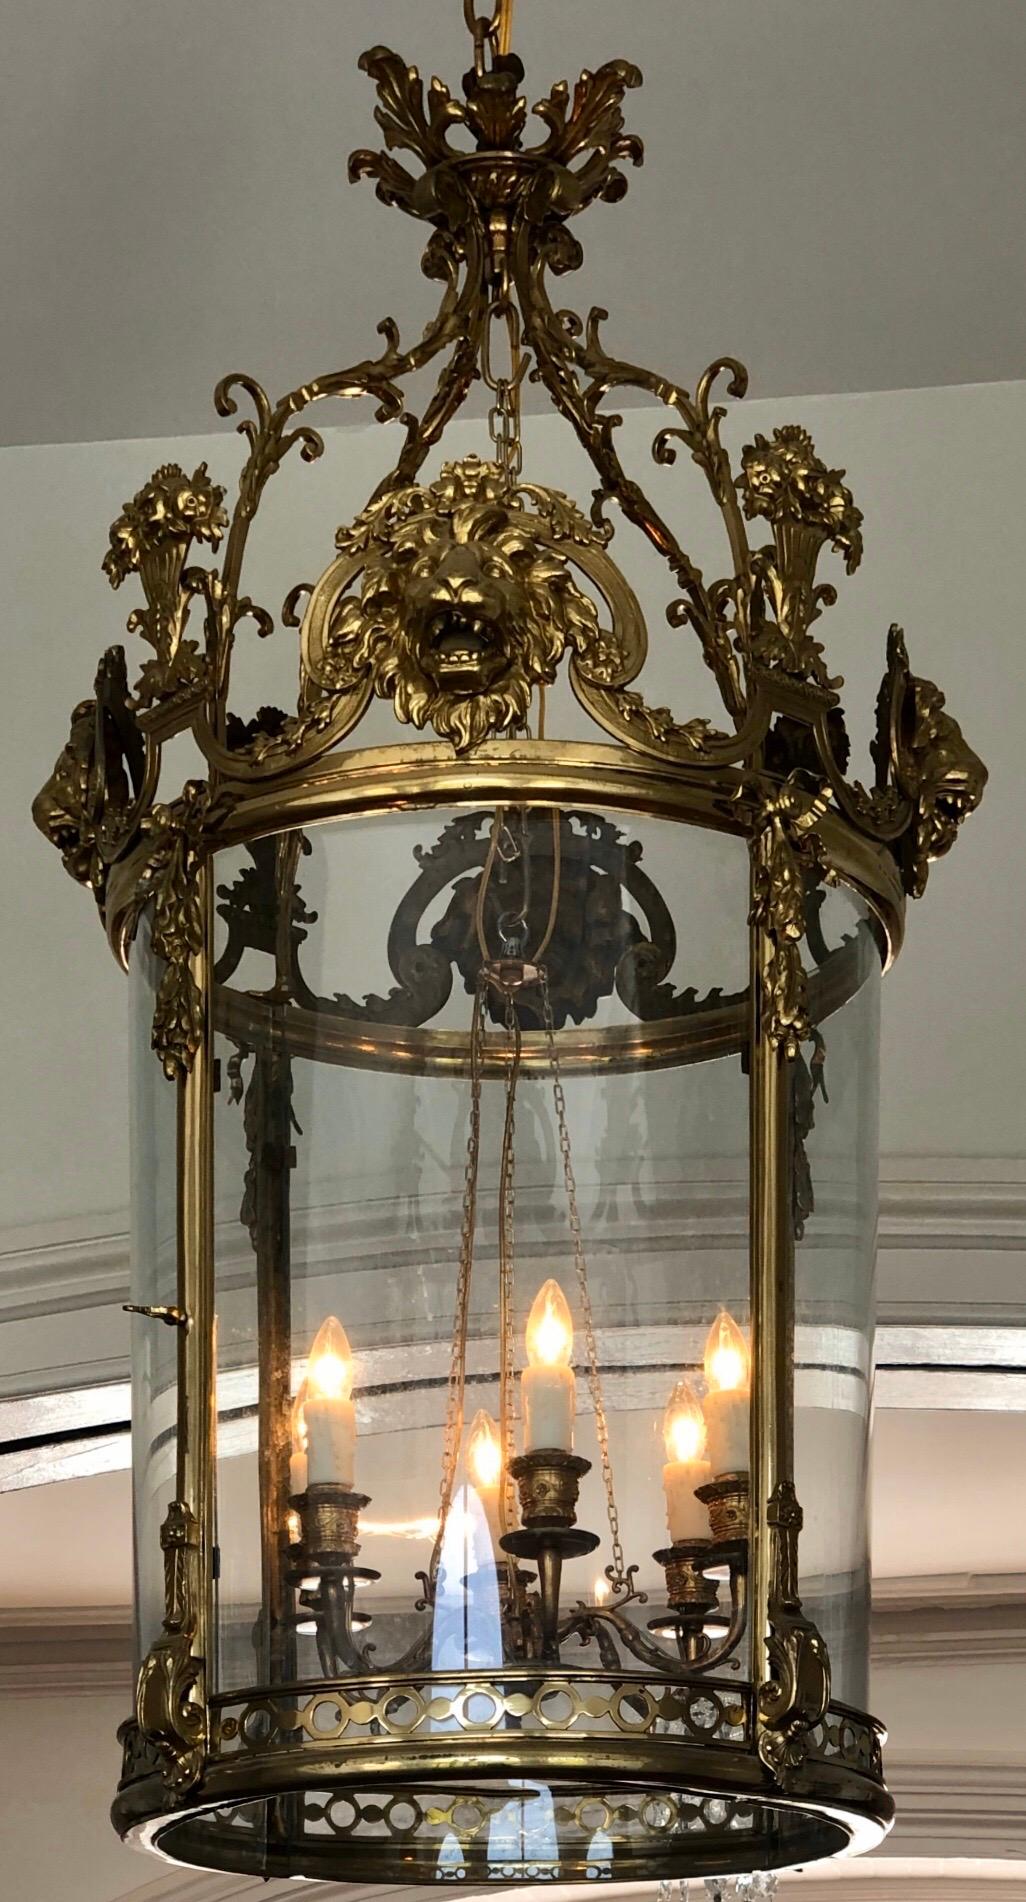 Monumental English Regency brass lantern with lion mask is illuminated by a Interior Cluster with six candelabra arms that where originally candle. This Classic Regency Lantern has four curved glass pane quadrants (one a hinged door) separated with